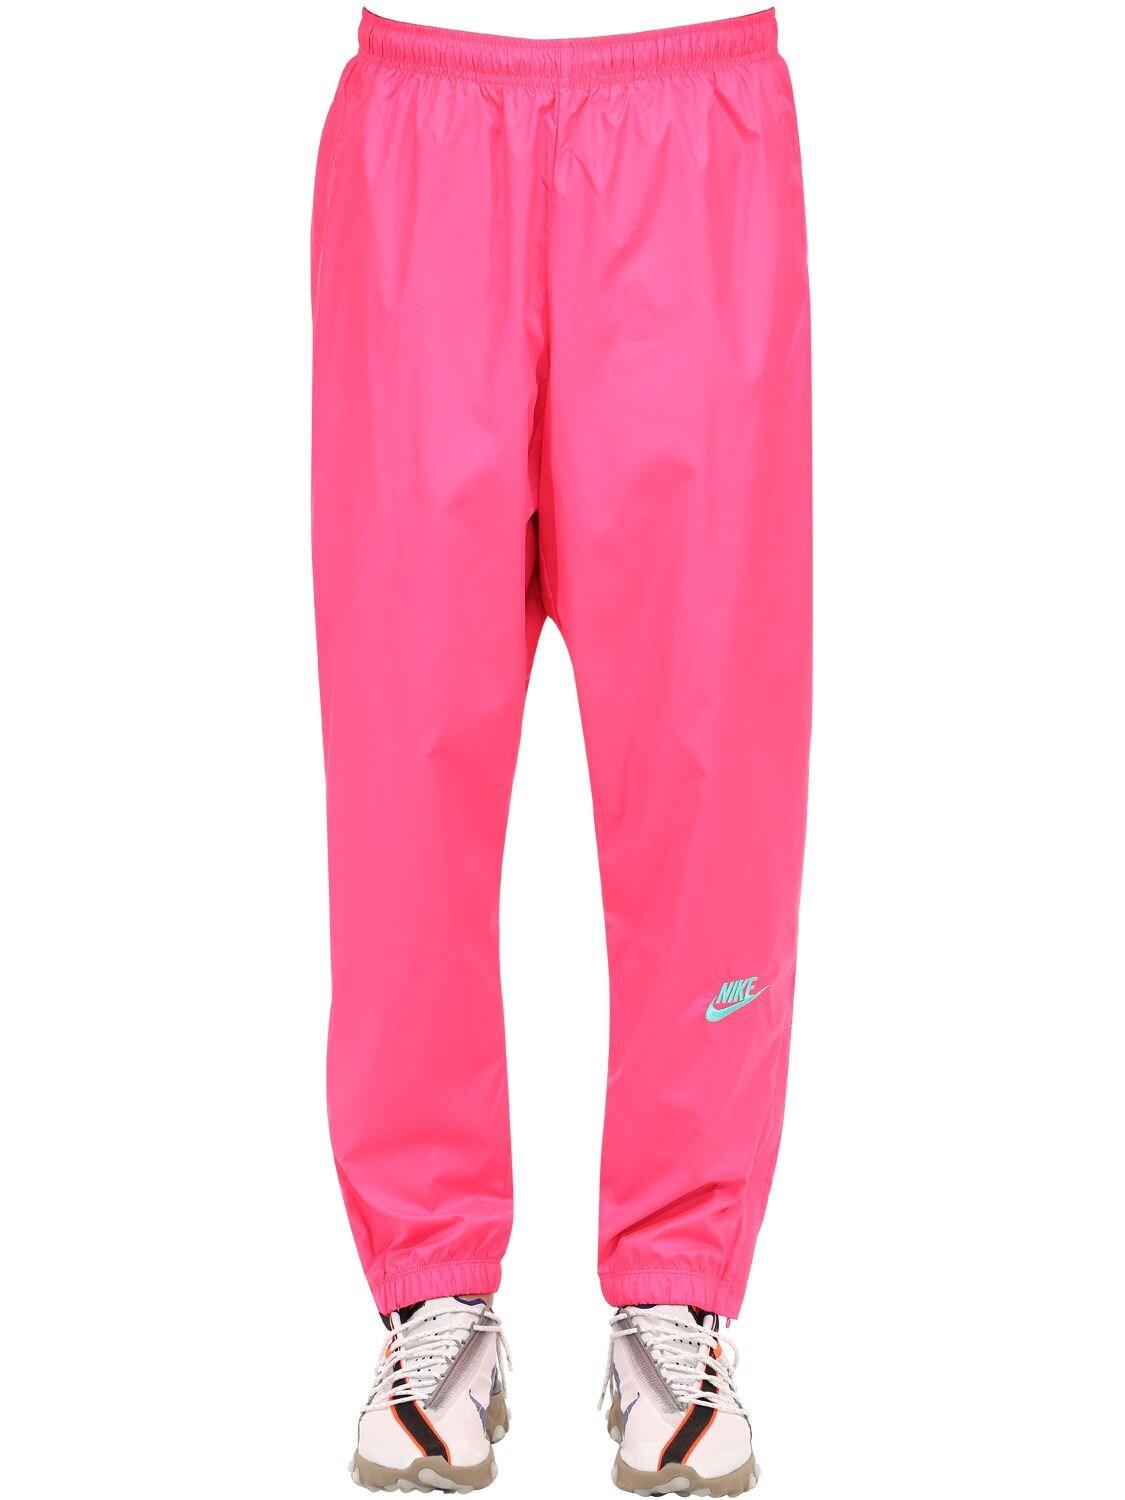 Nike X Atmos Track Pants in Pink for Men - Lyst